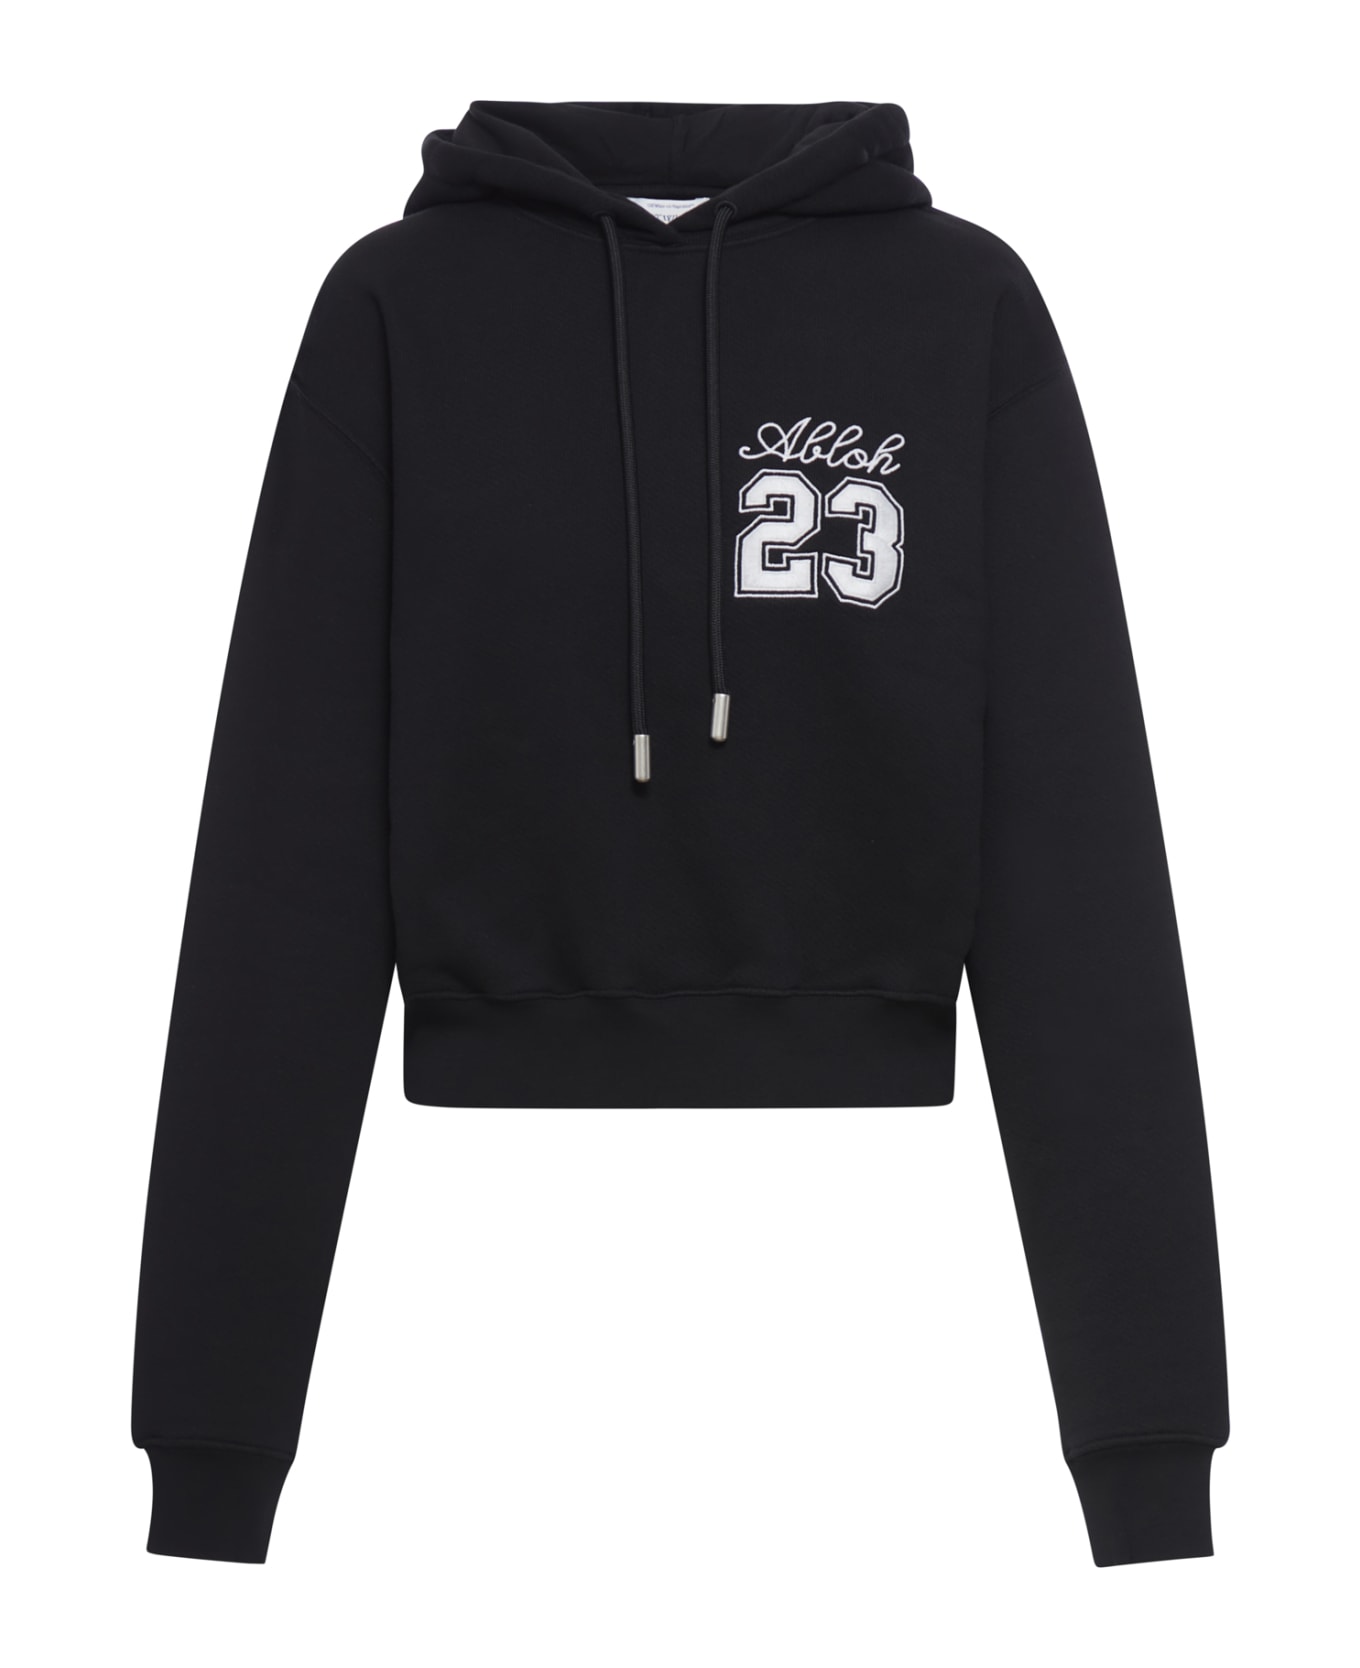 Off-White Ow 23 Embr Cropped Hoodie - Black White